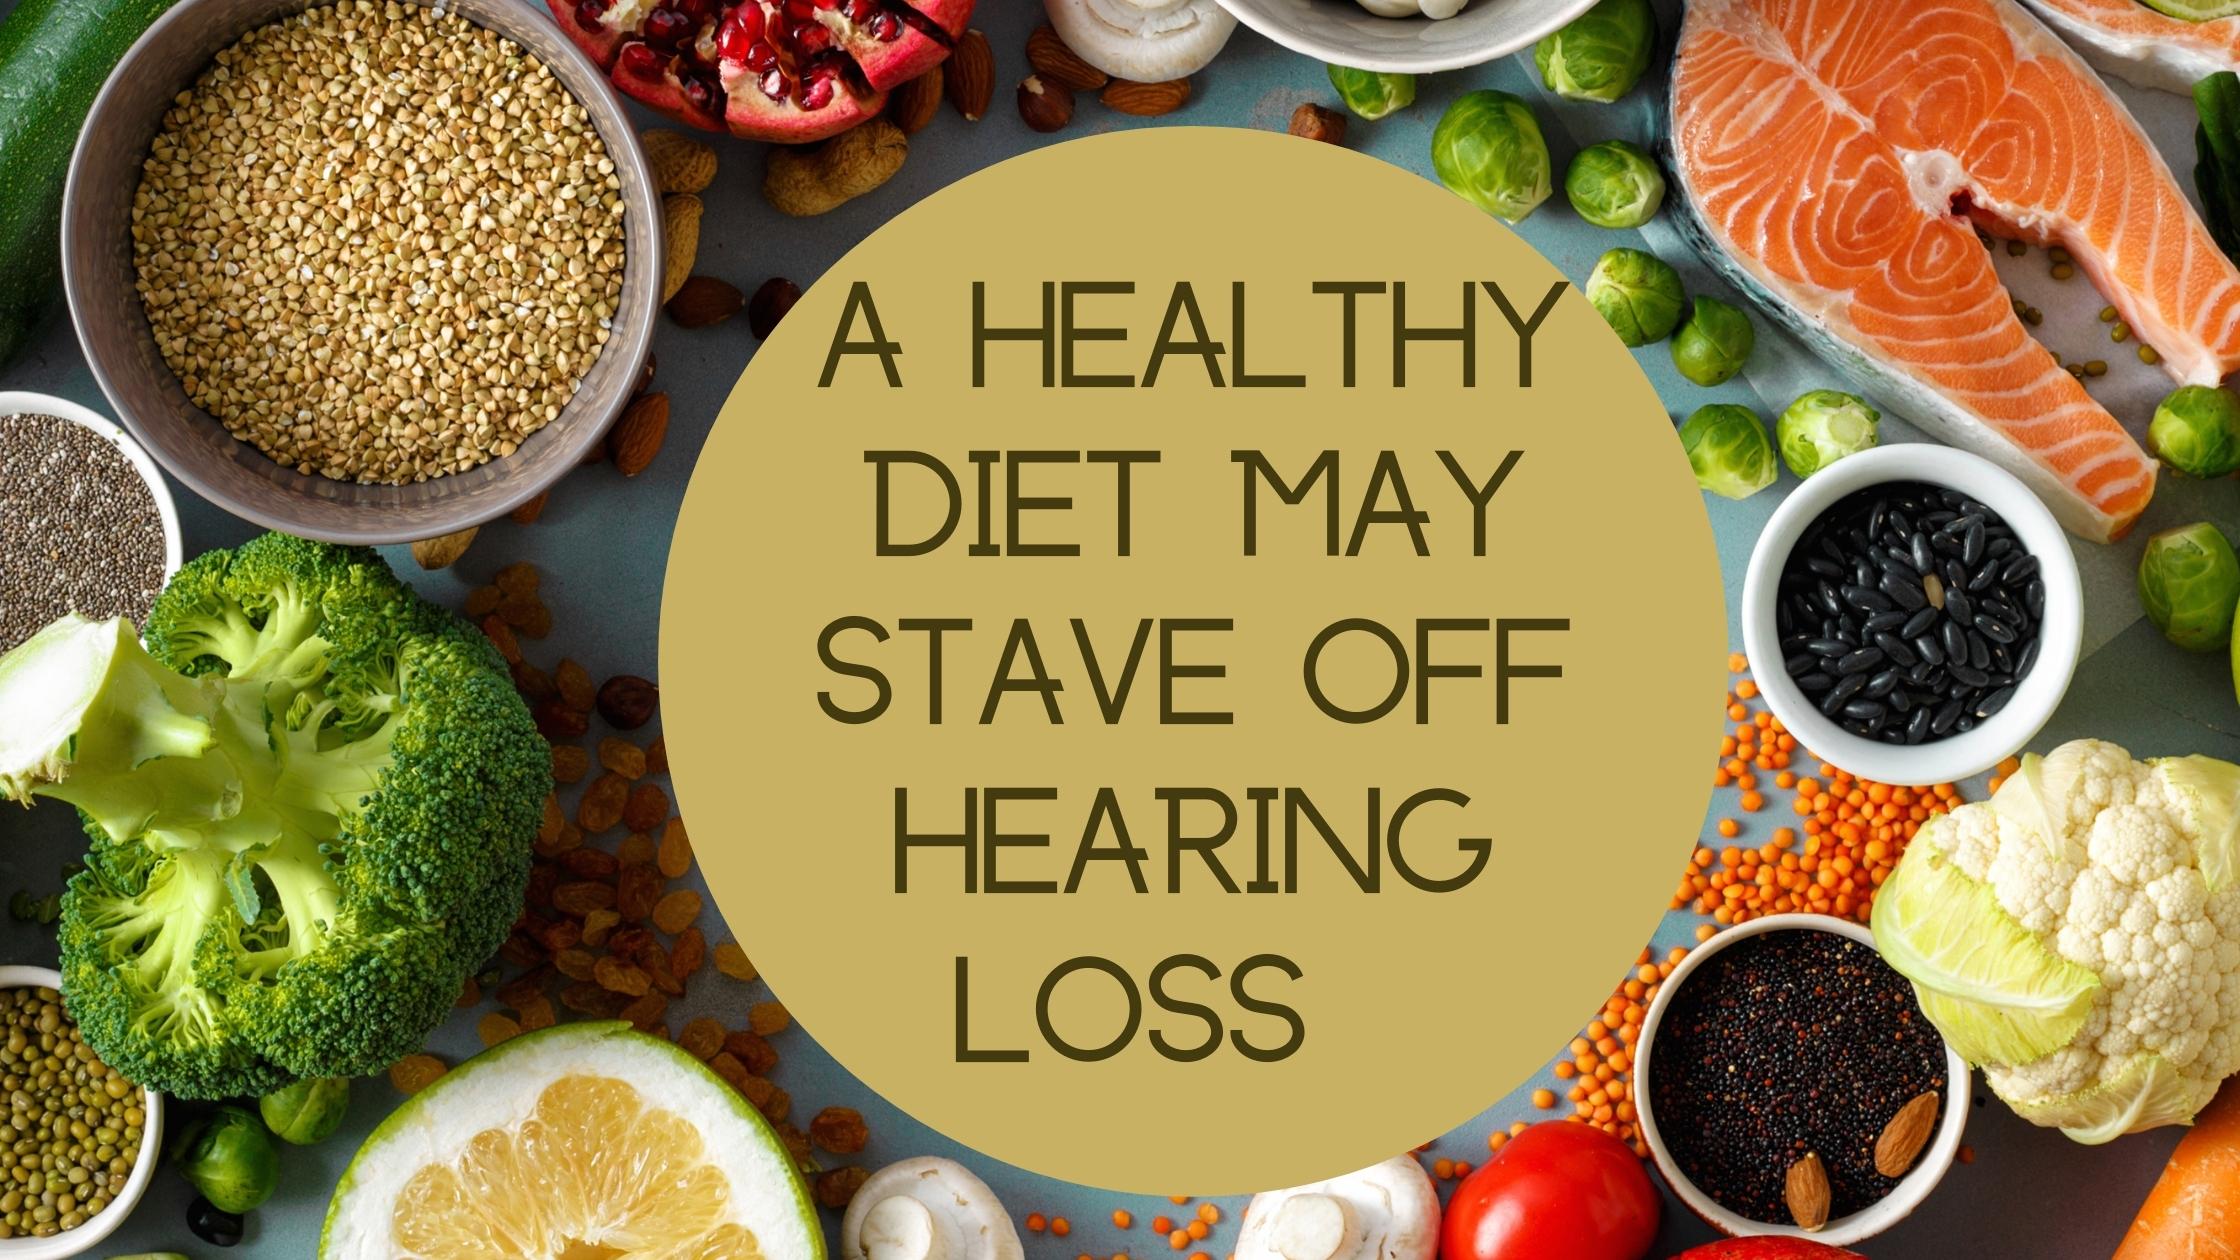 Featured image for “A Healthy Diet May Stave Off Hearing Loss”